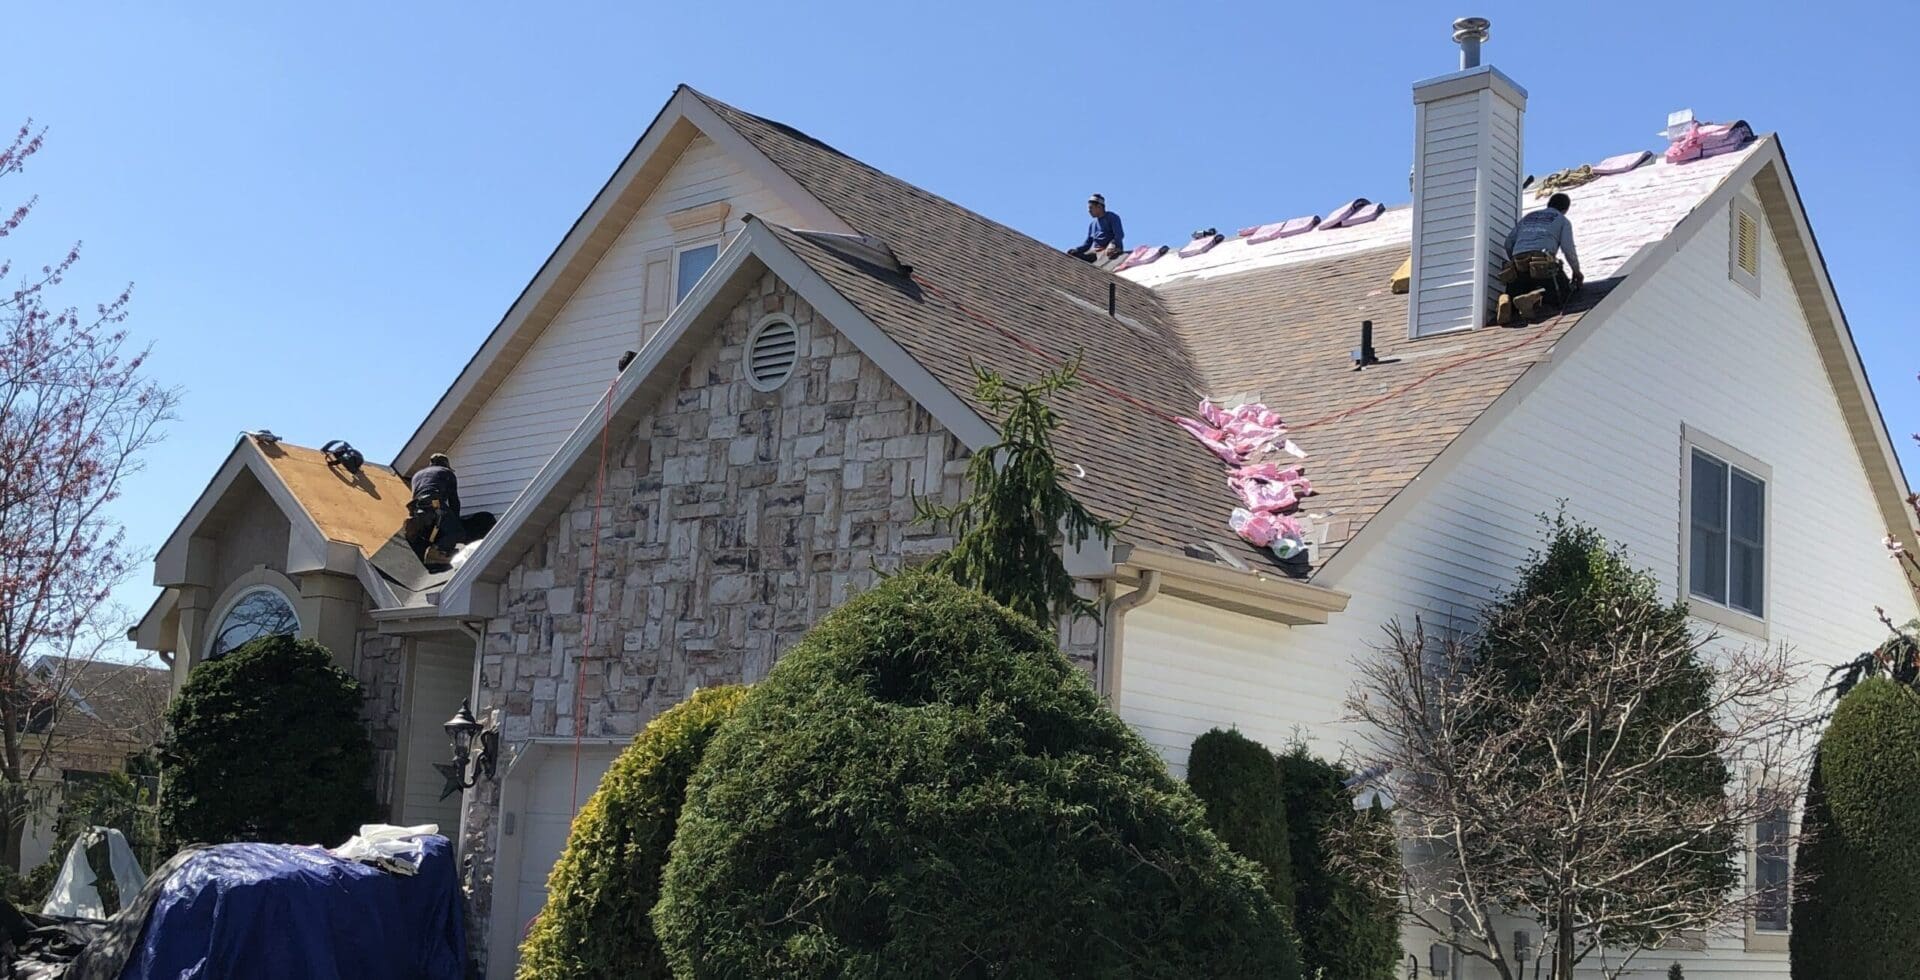 A person standing on top of a roof.